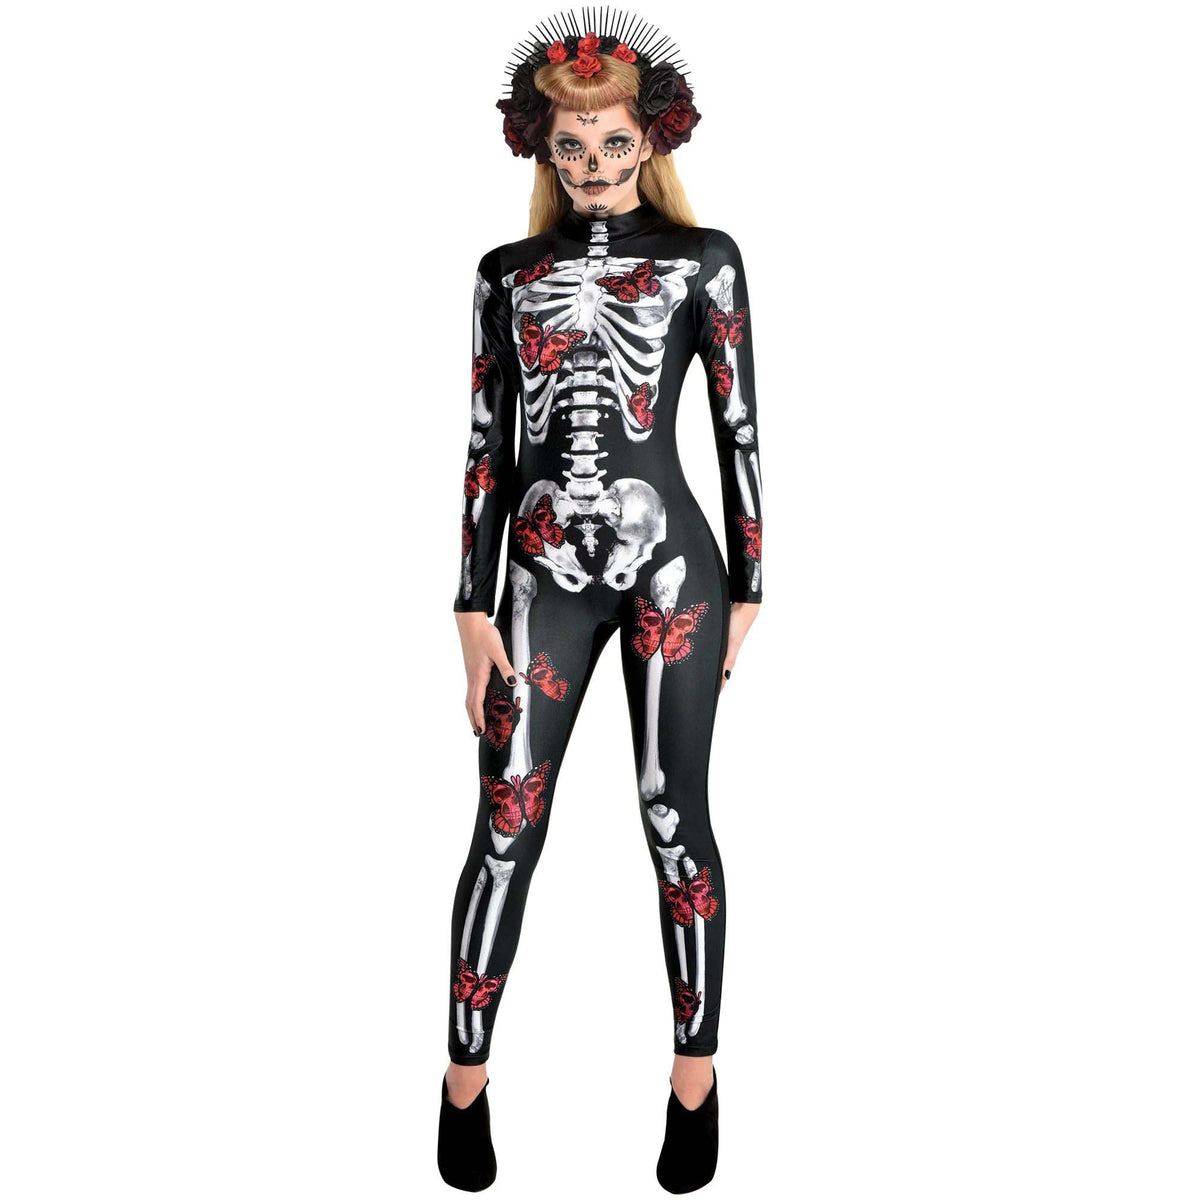 HALLOWEEN COSTUME CO. Costumes Day of the Dead Skeleton Catsuit for Adults